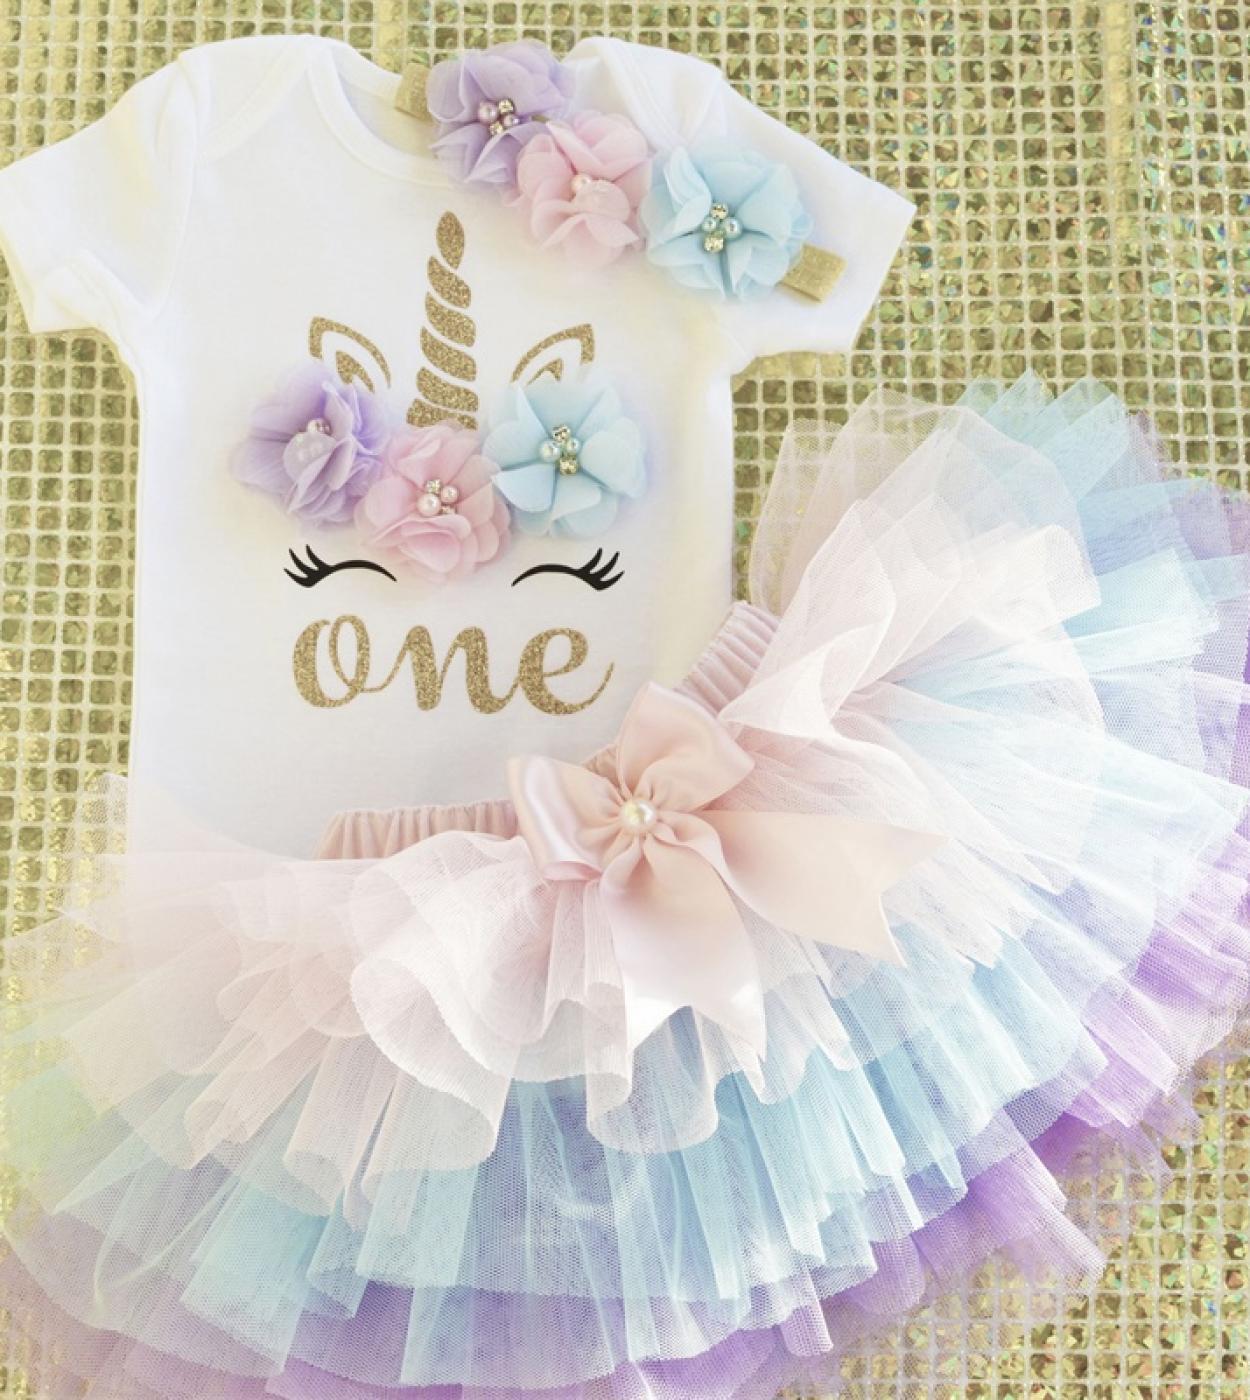 1st Birthday Outfits Baby Girl Clothes Fluffy Children Ballet Skirts With Headband Cotton Romper Infant Clothing Suits F